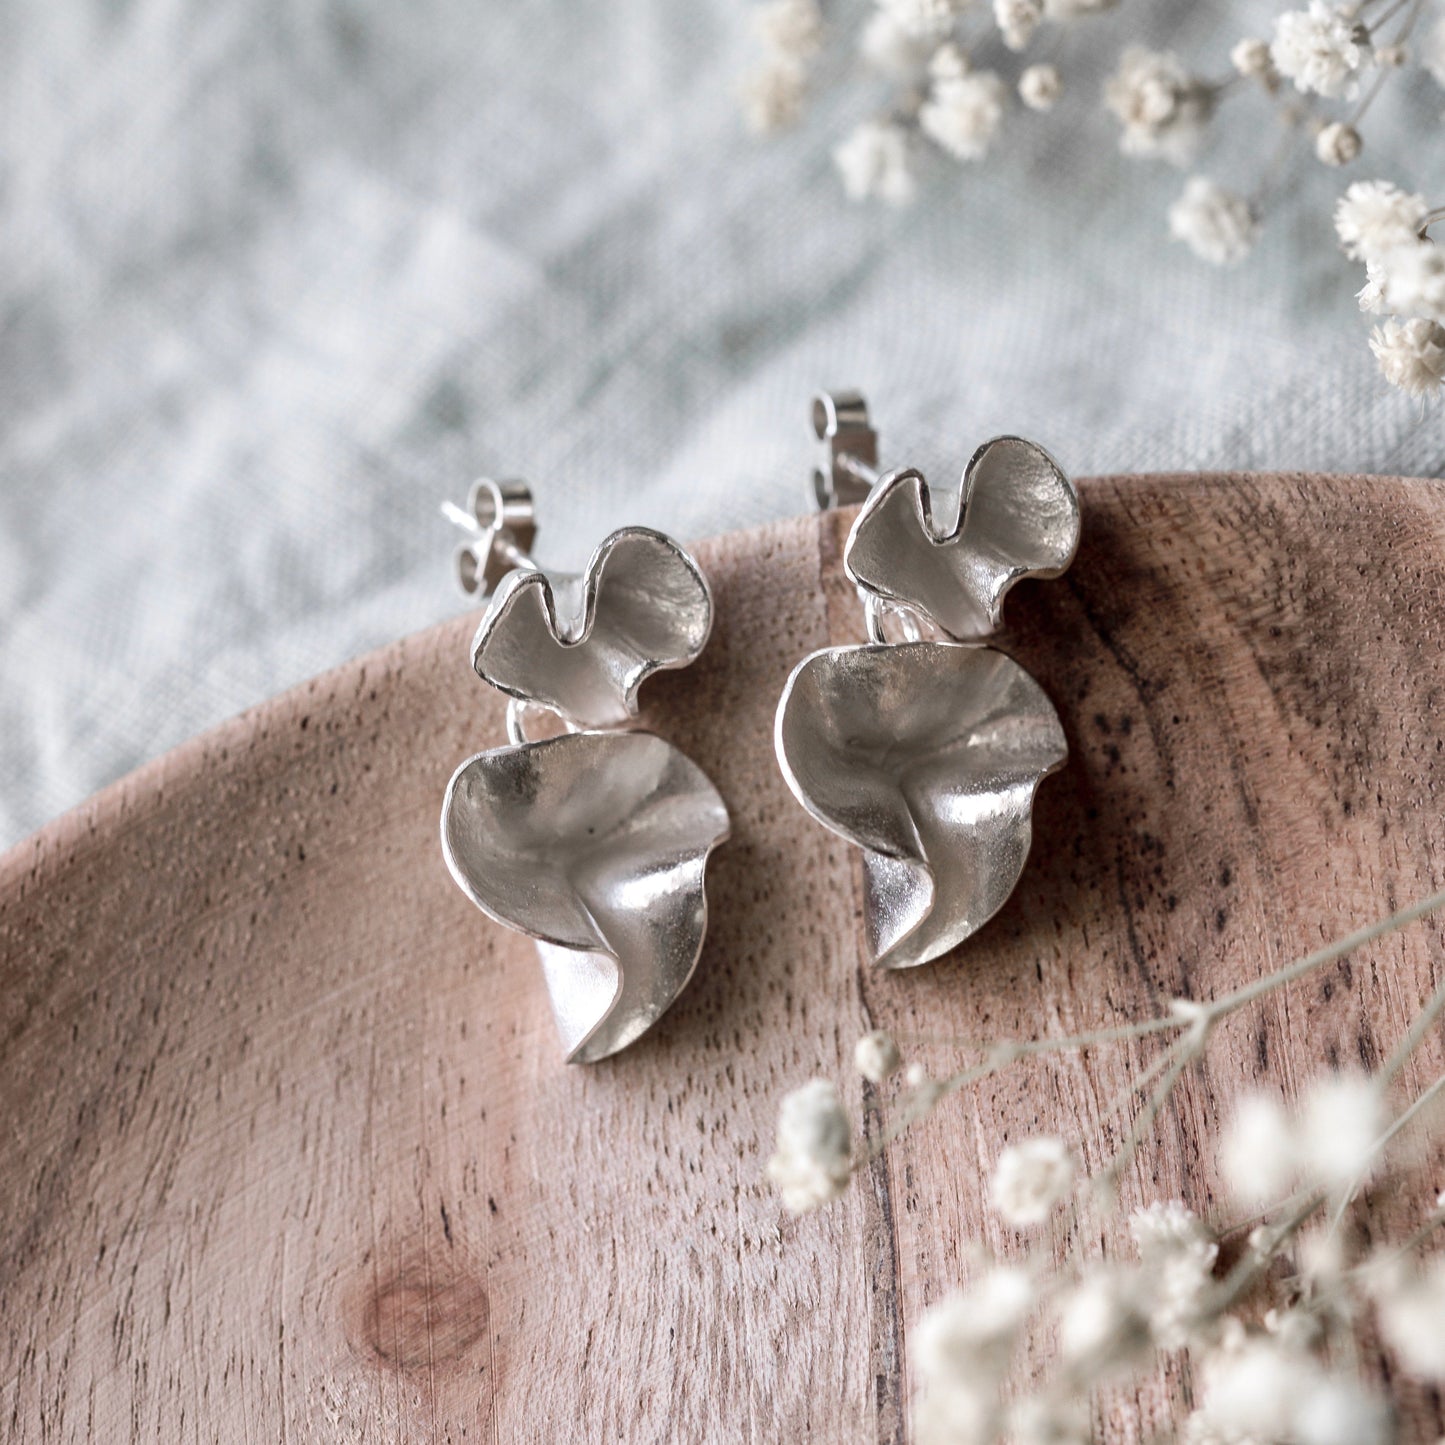 Silver Double Blossom Studs Earrings Handmade by Anna Calvert Jewellery in the UK